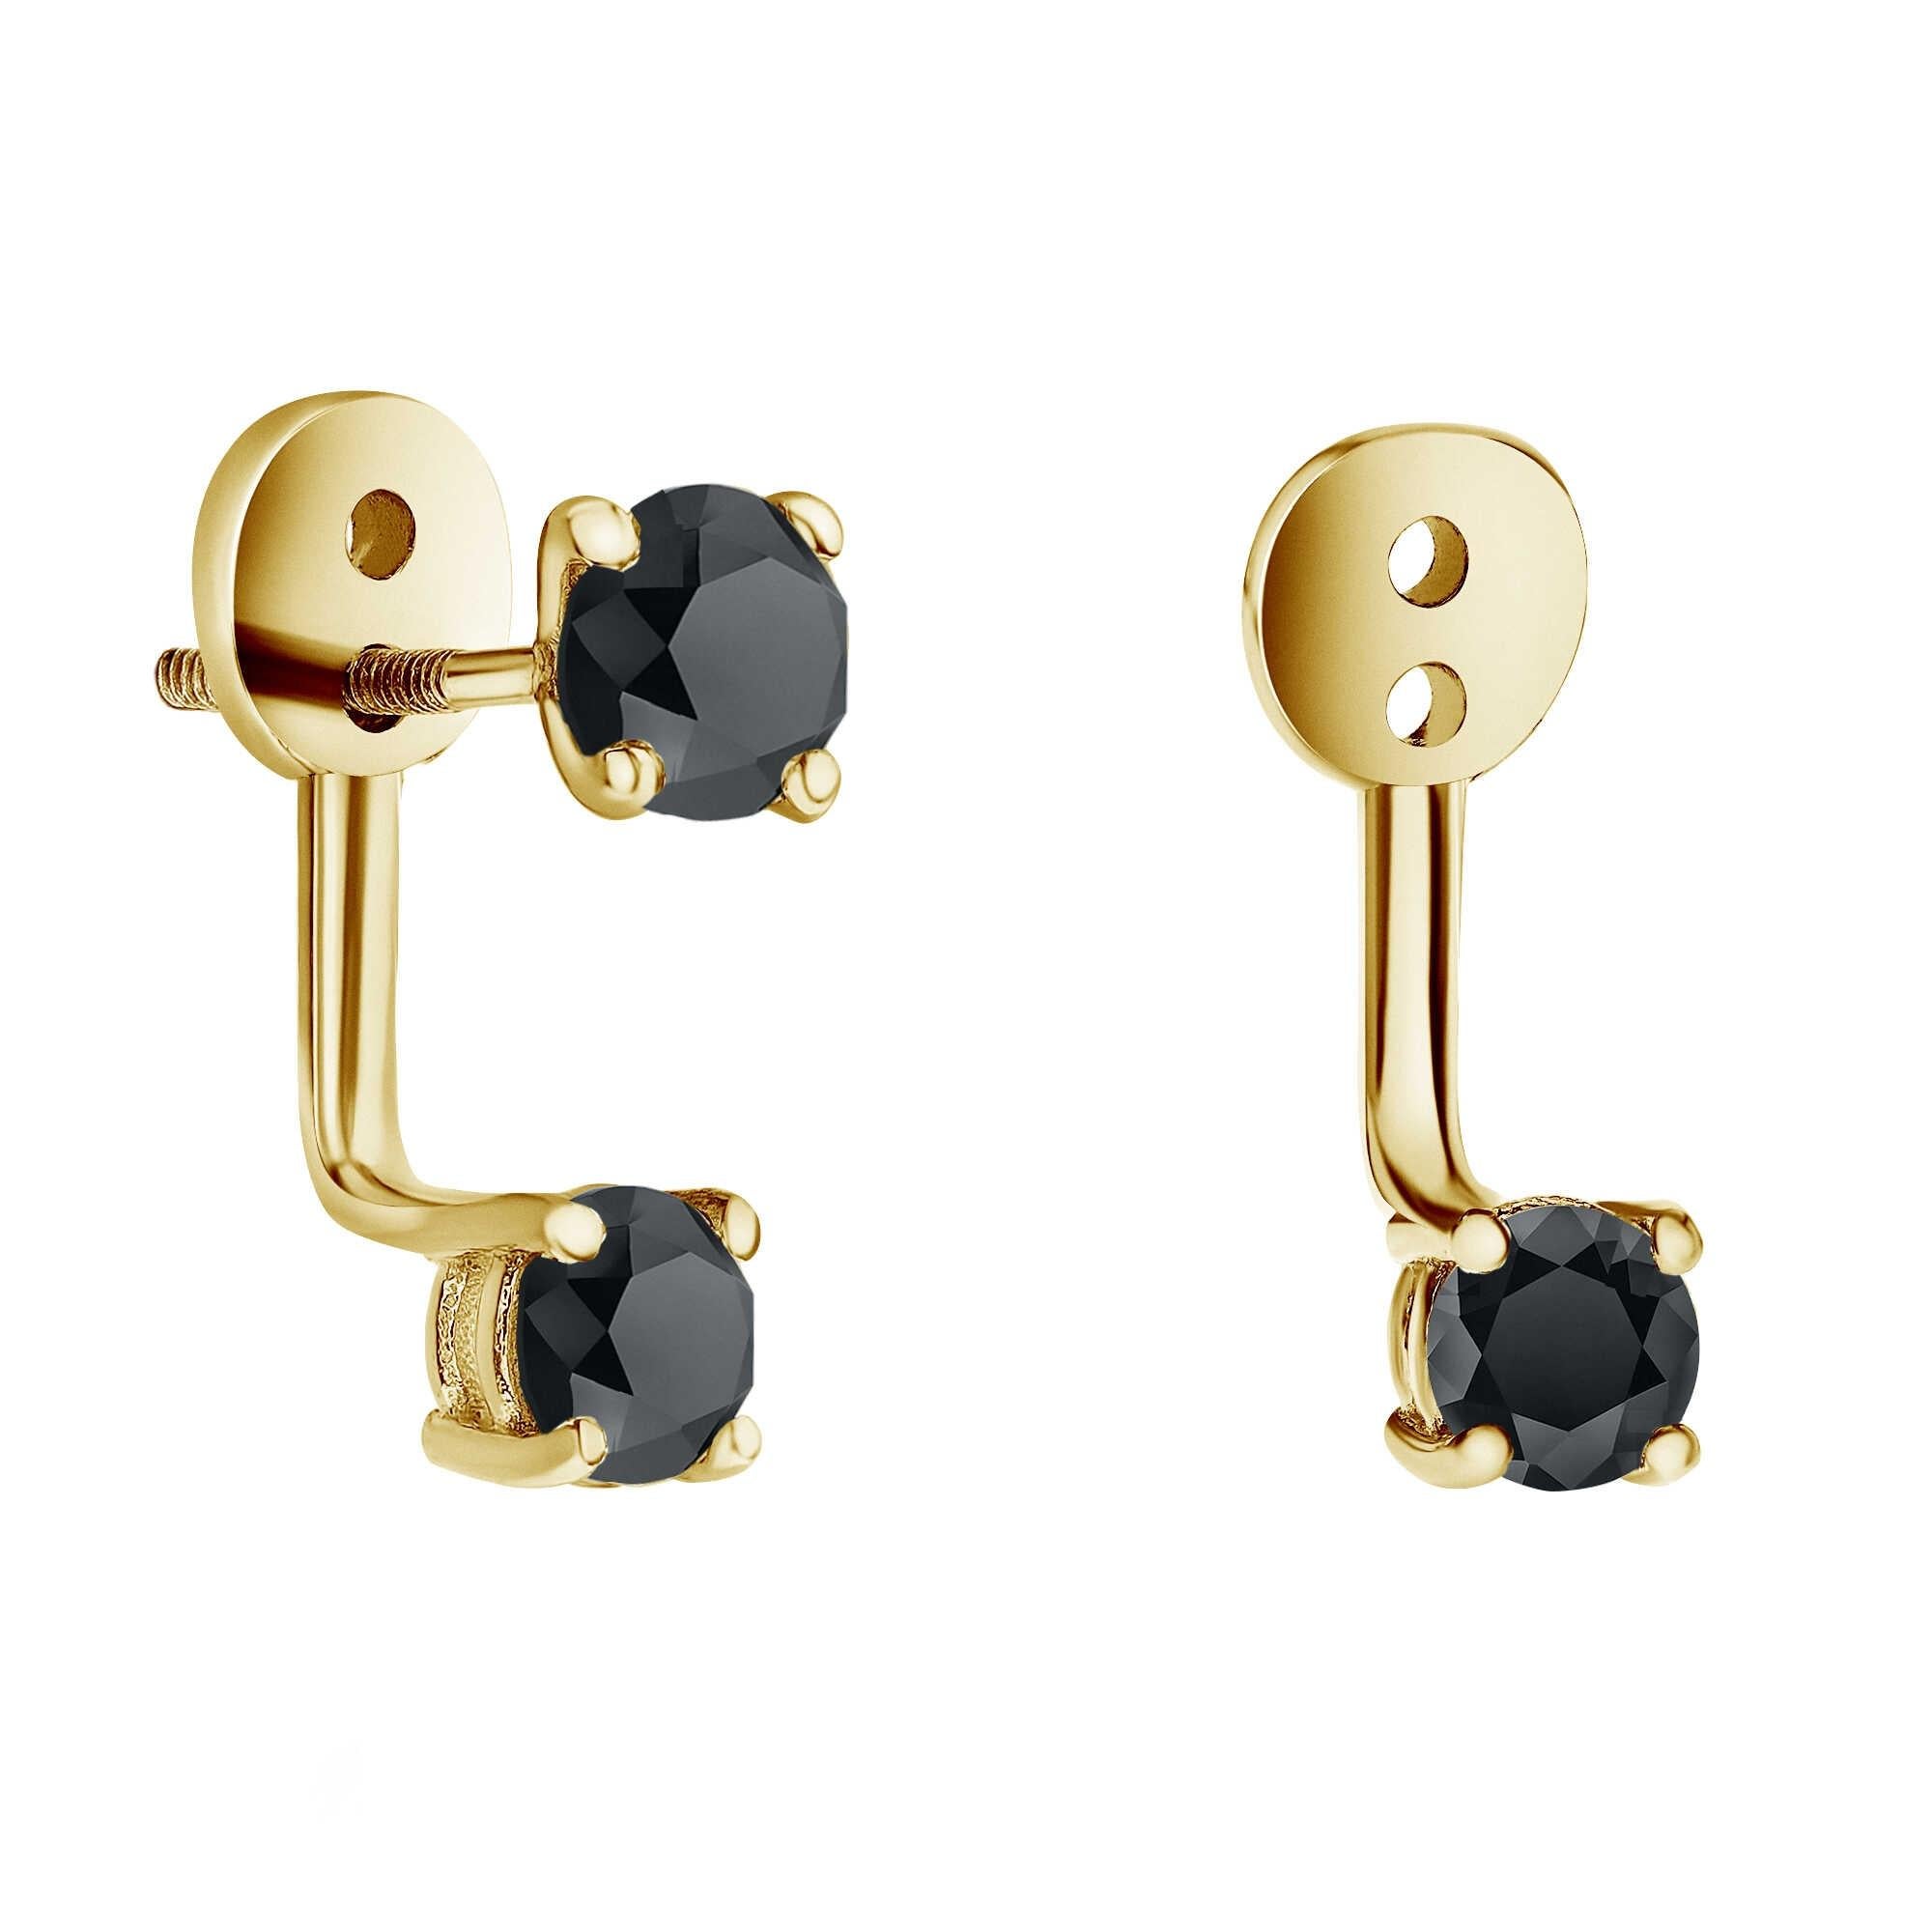 Black Diamond Studs & Ear Jacket Set in 14 Karat Yellow Gold - Shlomit Rogel

Modern elegance, these 14k yellow gold ear jackets are truly beautiful! Delicately embellished with genuine black diamonds, the stud is attached to a gold bracket with a